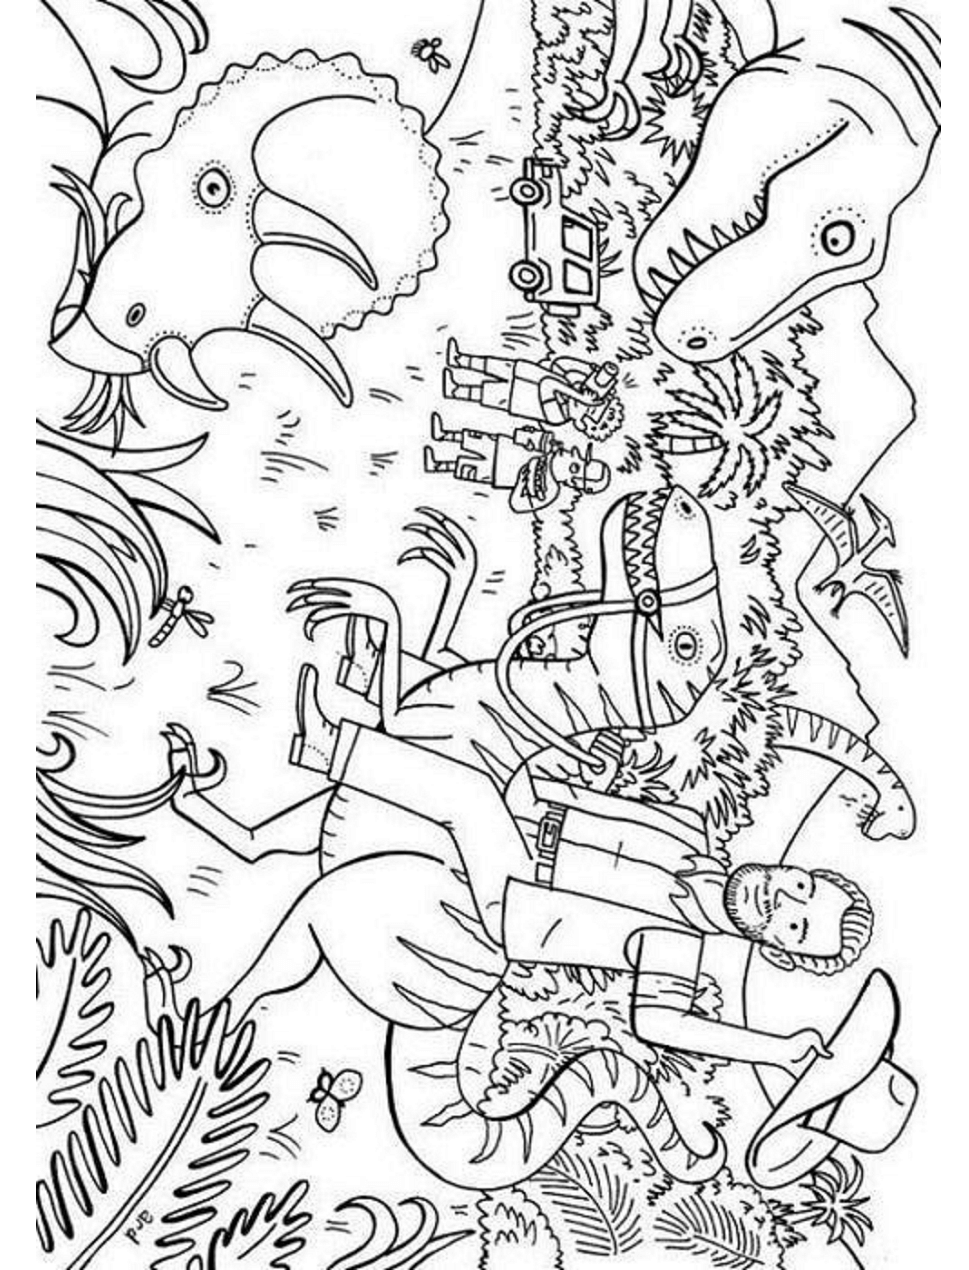 Man On Small Dinosaur Coloring Page